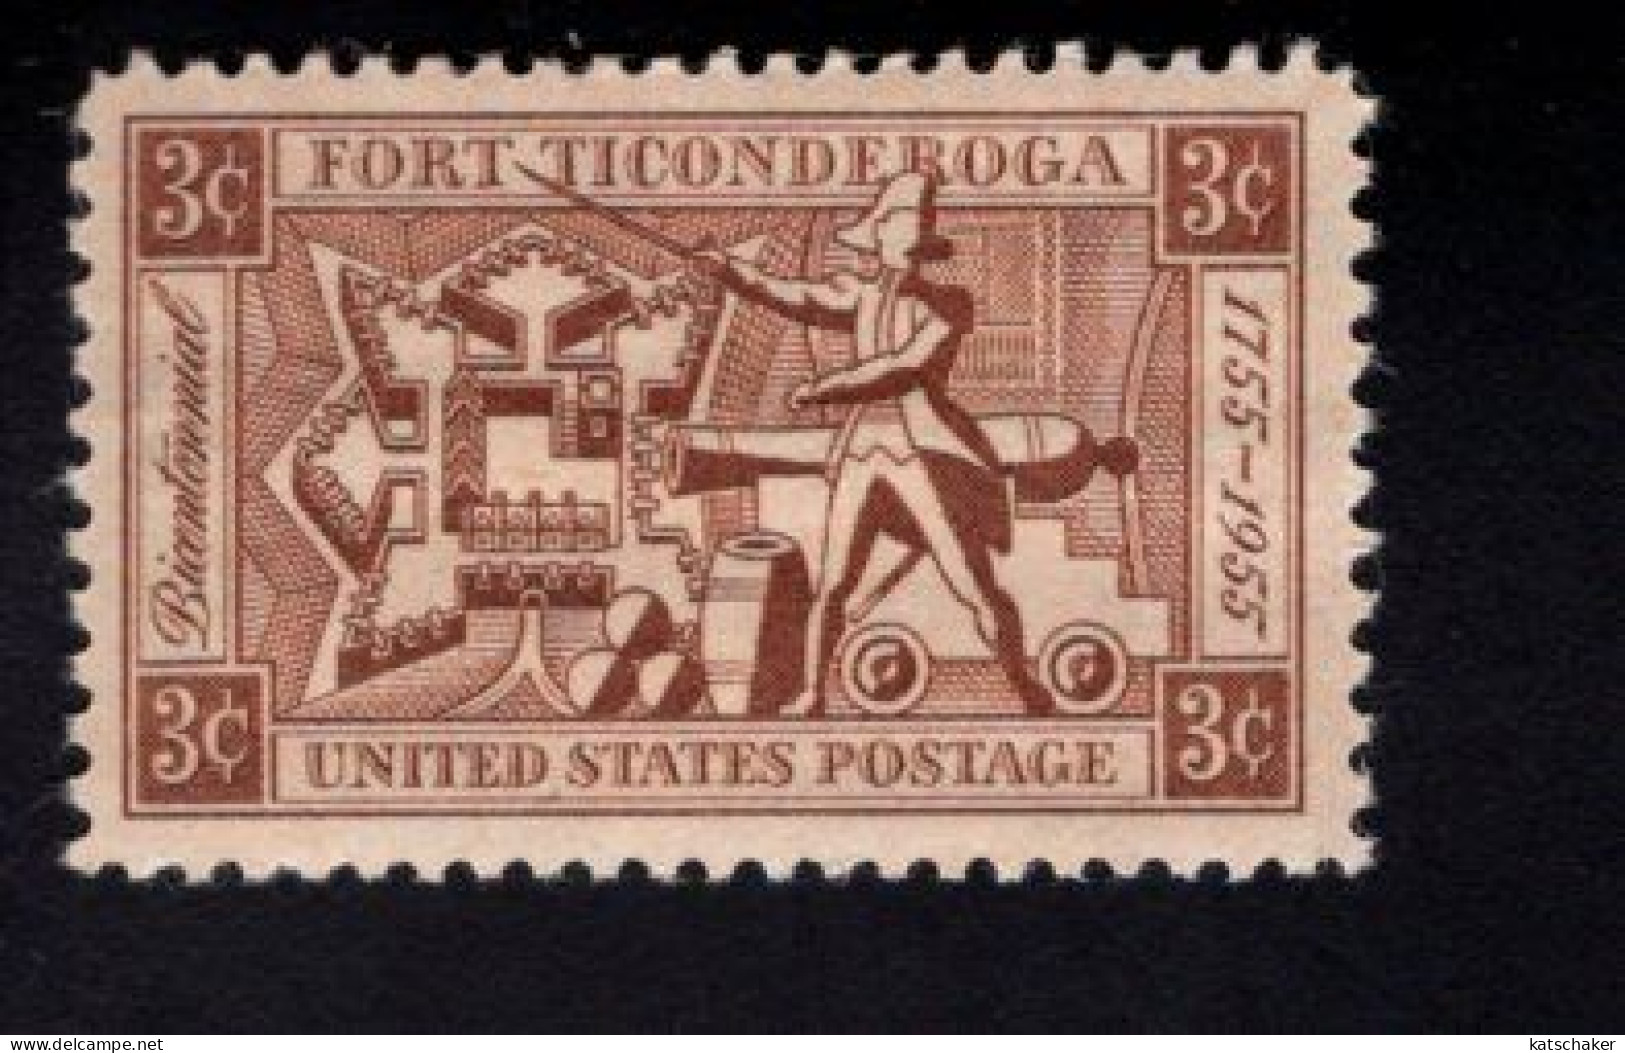 2018737274 1955 SCOTT 1071 (XX) POSTFRIS MINT NEVER HINGED  - FORT TICONDEROGA ISSUE - MAP OF THE FORT - Ungebraucht